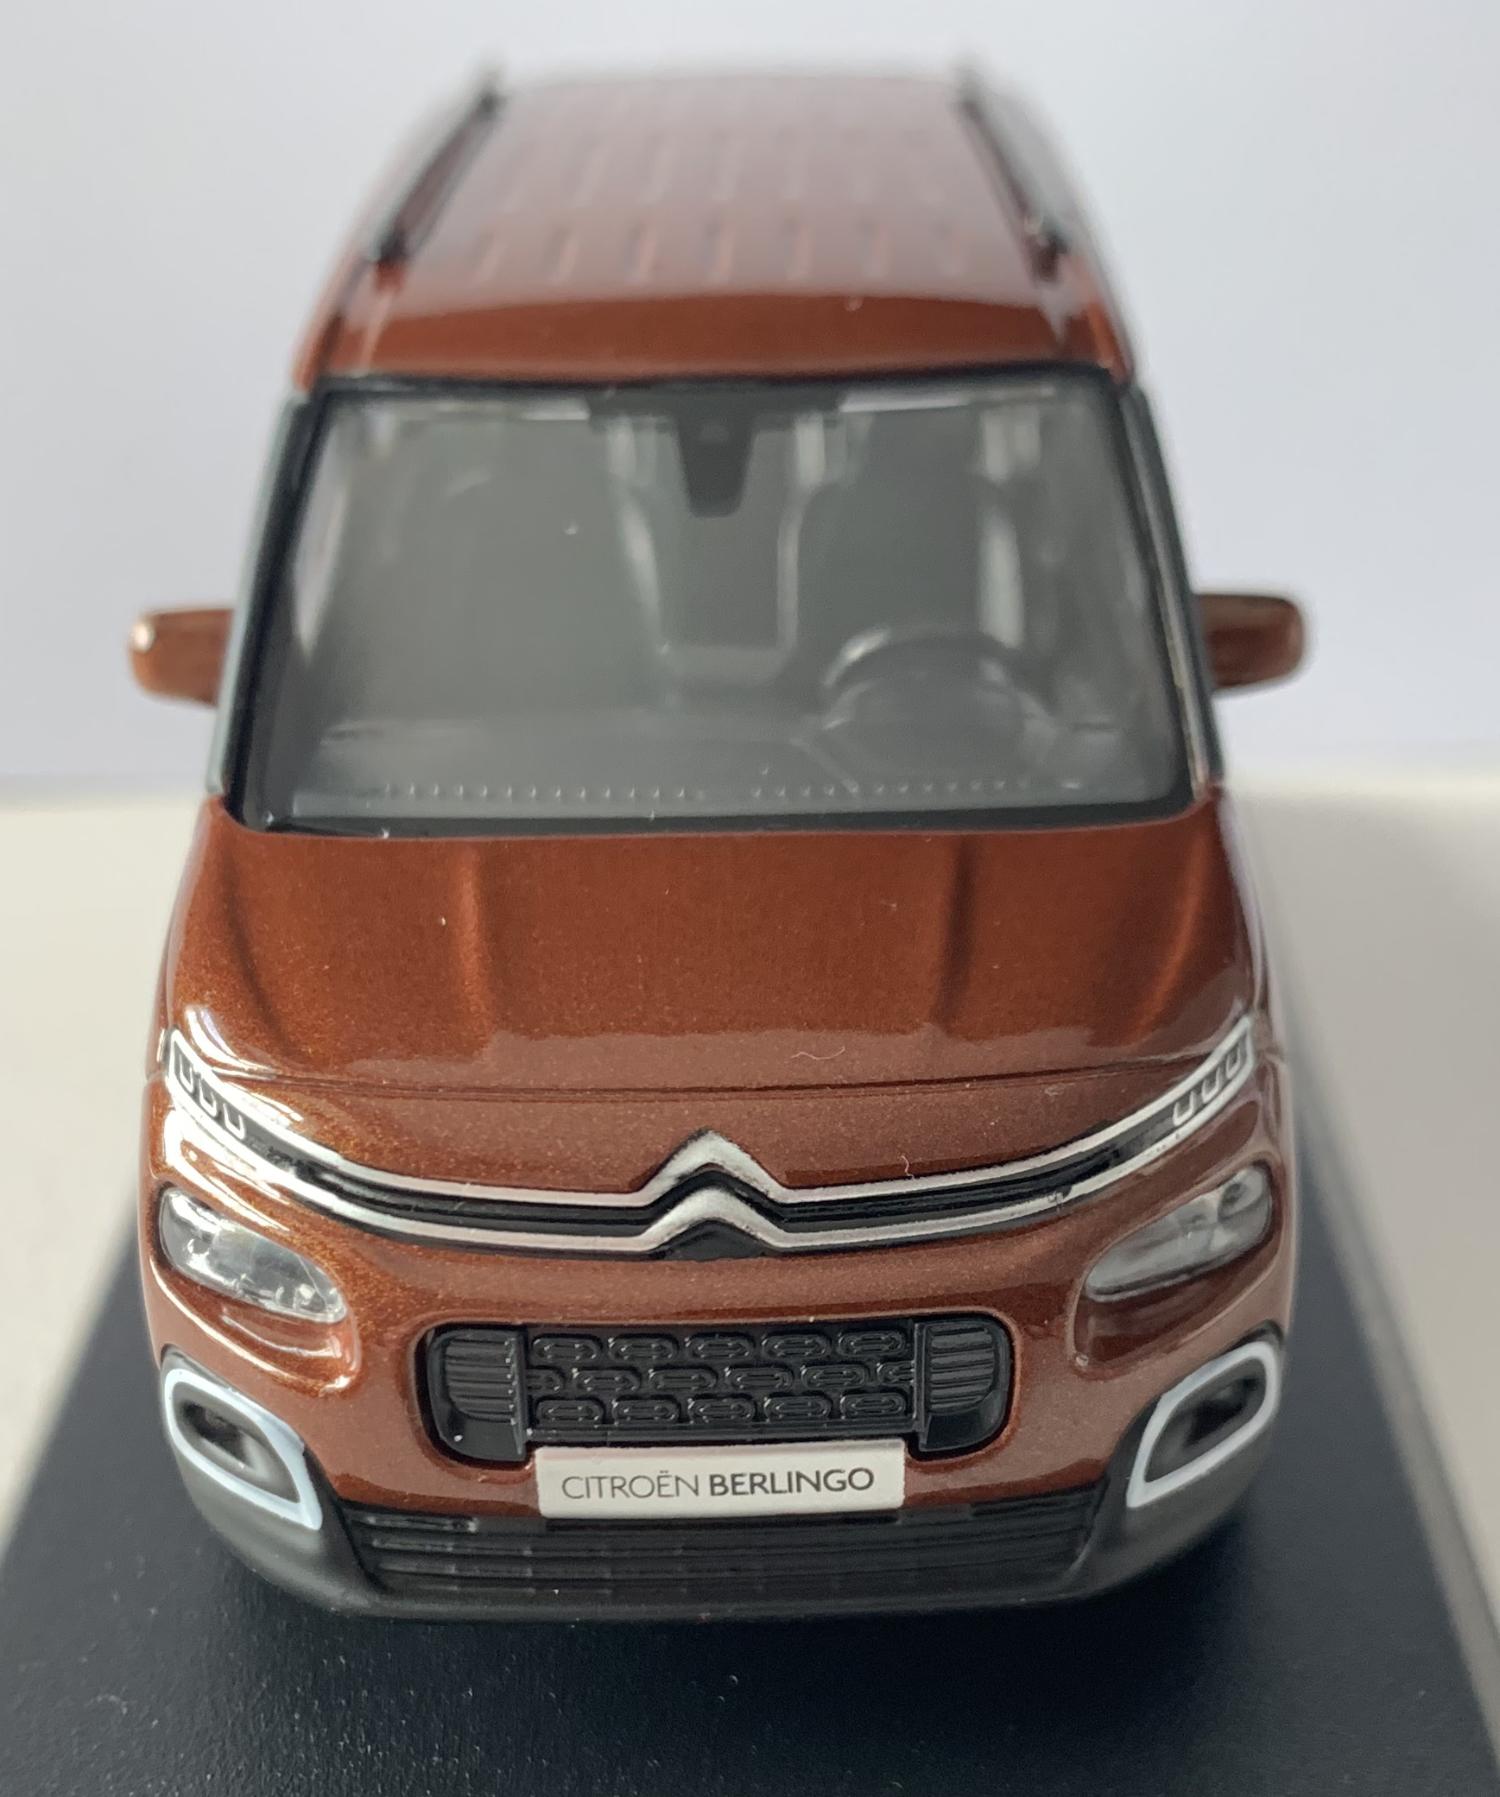 An excellent scale model of a Citroen Berlingo decorated in metallic copper with black roof rails, tinted windows and black wheels.